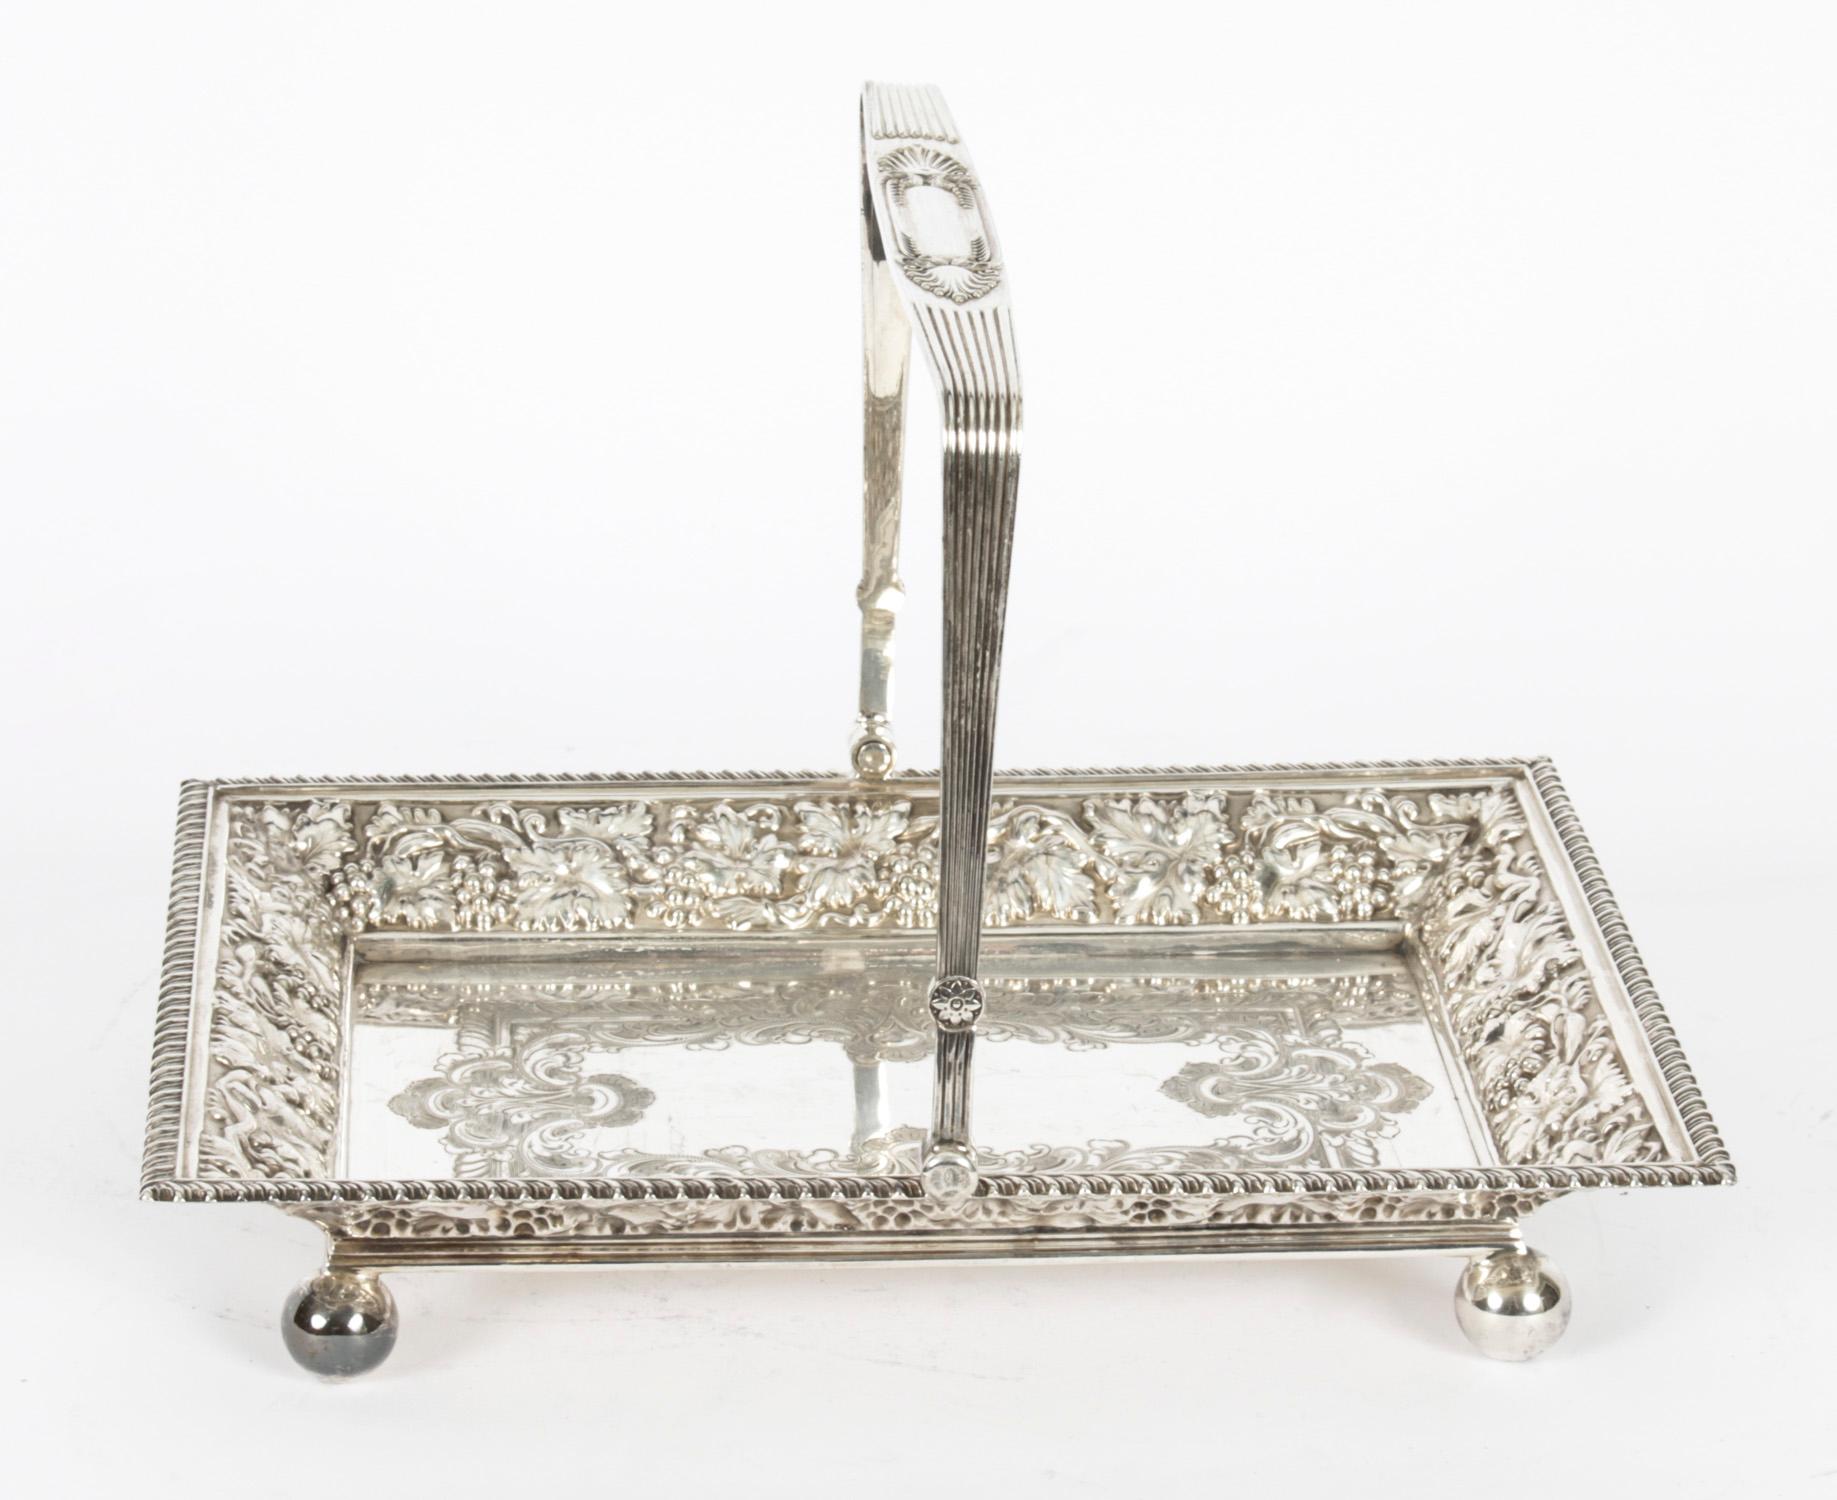 This is a stunning English Victorian silver plated fruit or bread basket by Roberts & Belk, circa 1880 in date.

The rectangular shaped body features a embossed grape vine with foliate and floral and decoration boarder, the center has fabulous